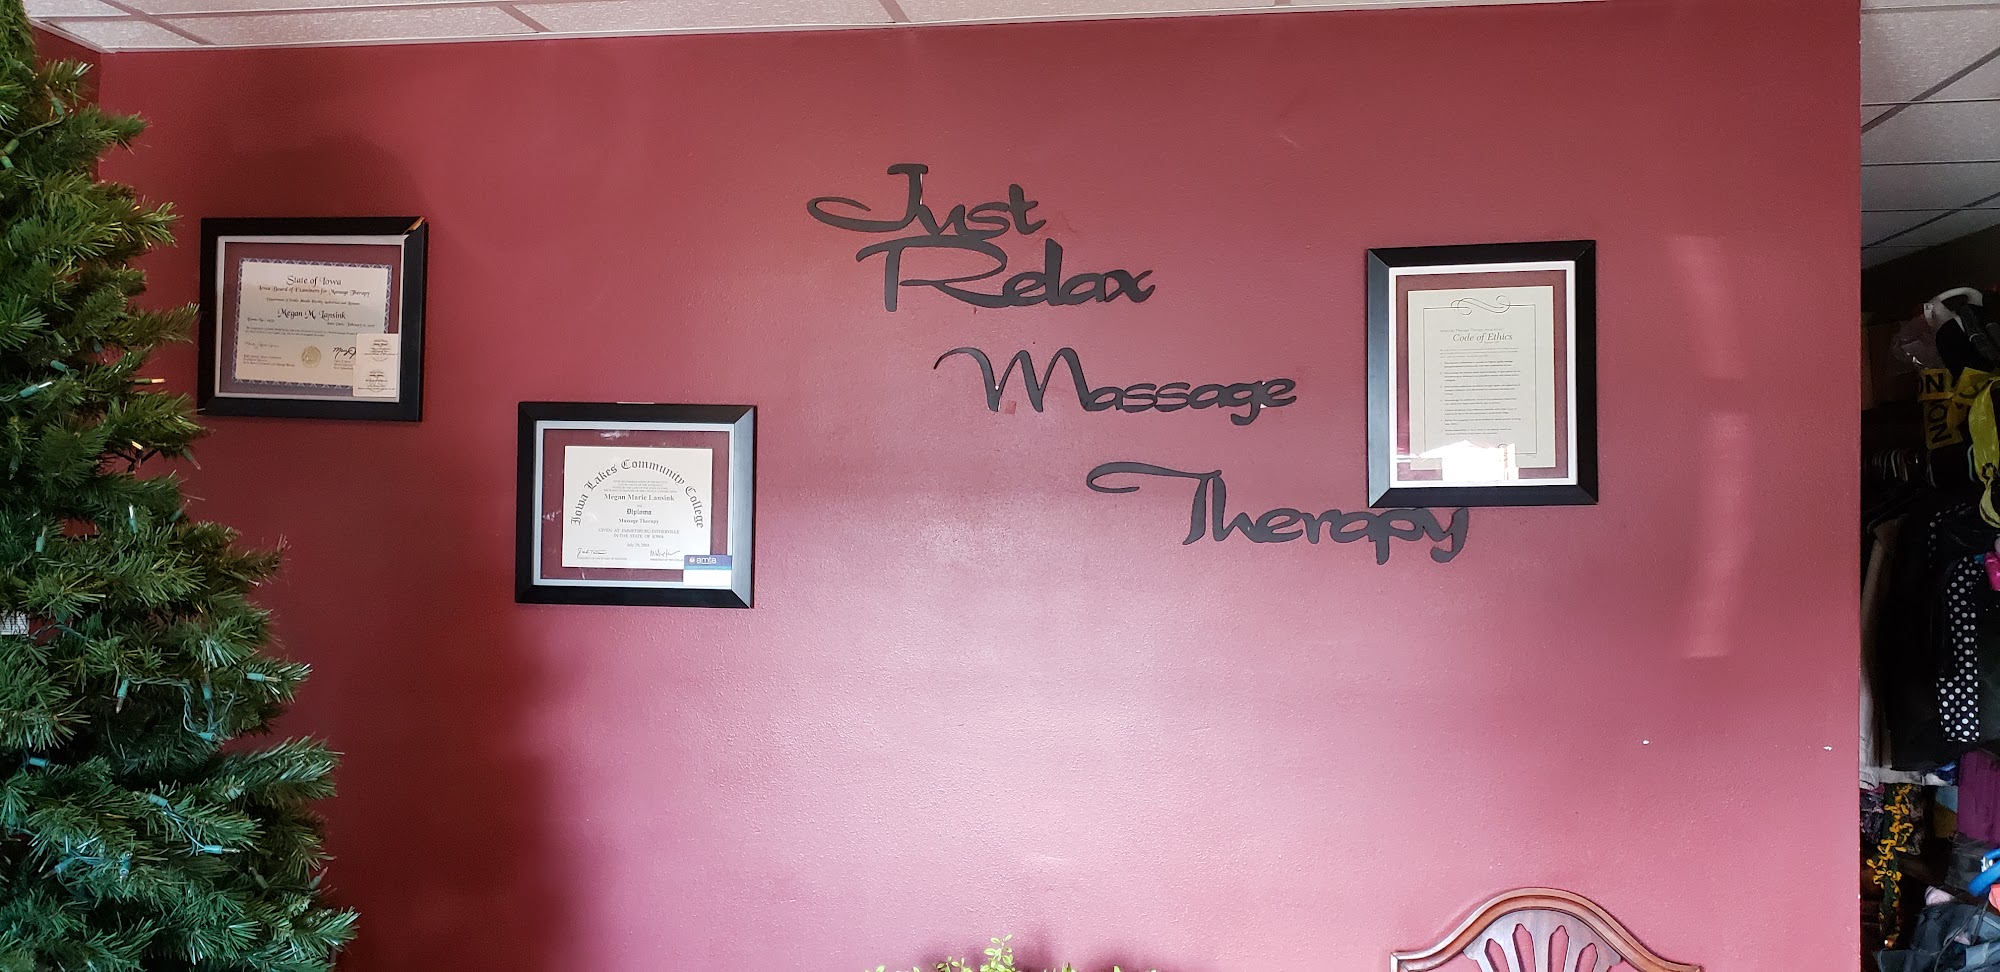 Just Relax Massage Therapy 409 Forrest Ave, Ida Grove Iowa 51445